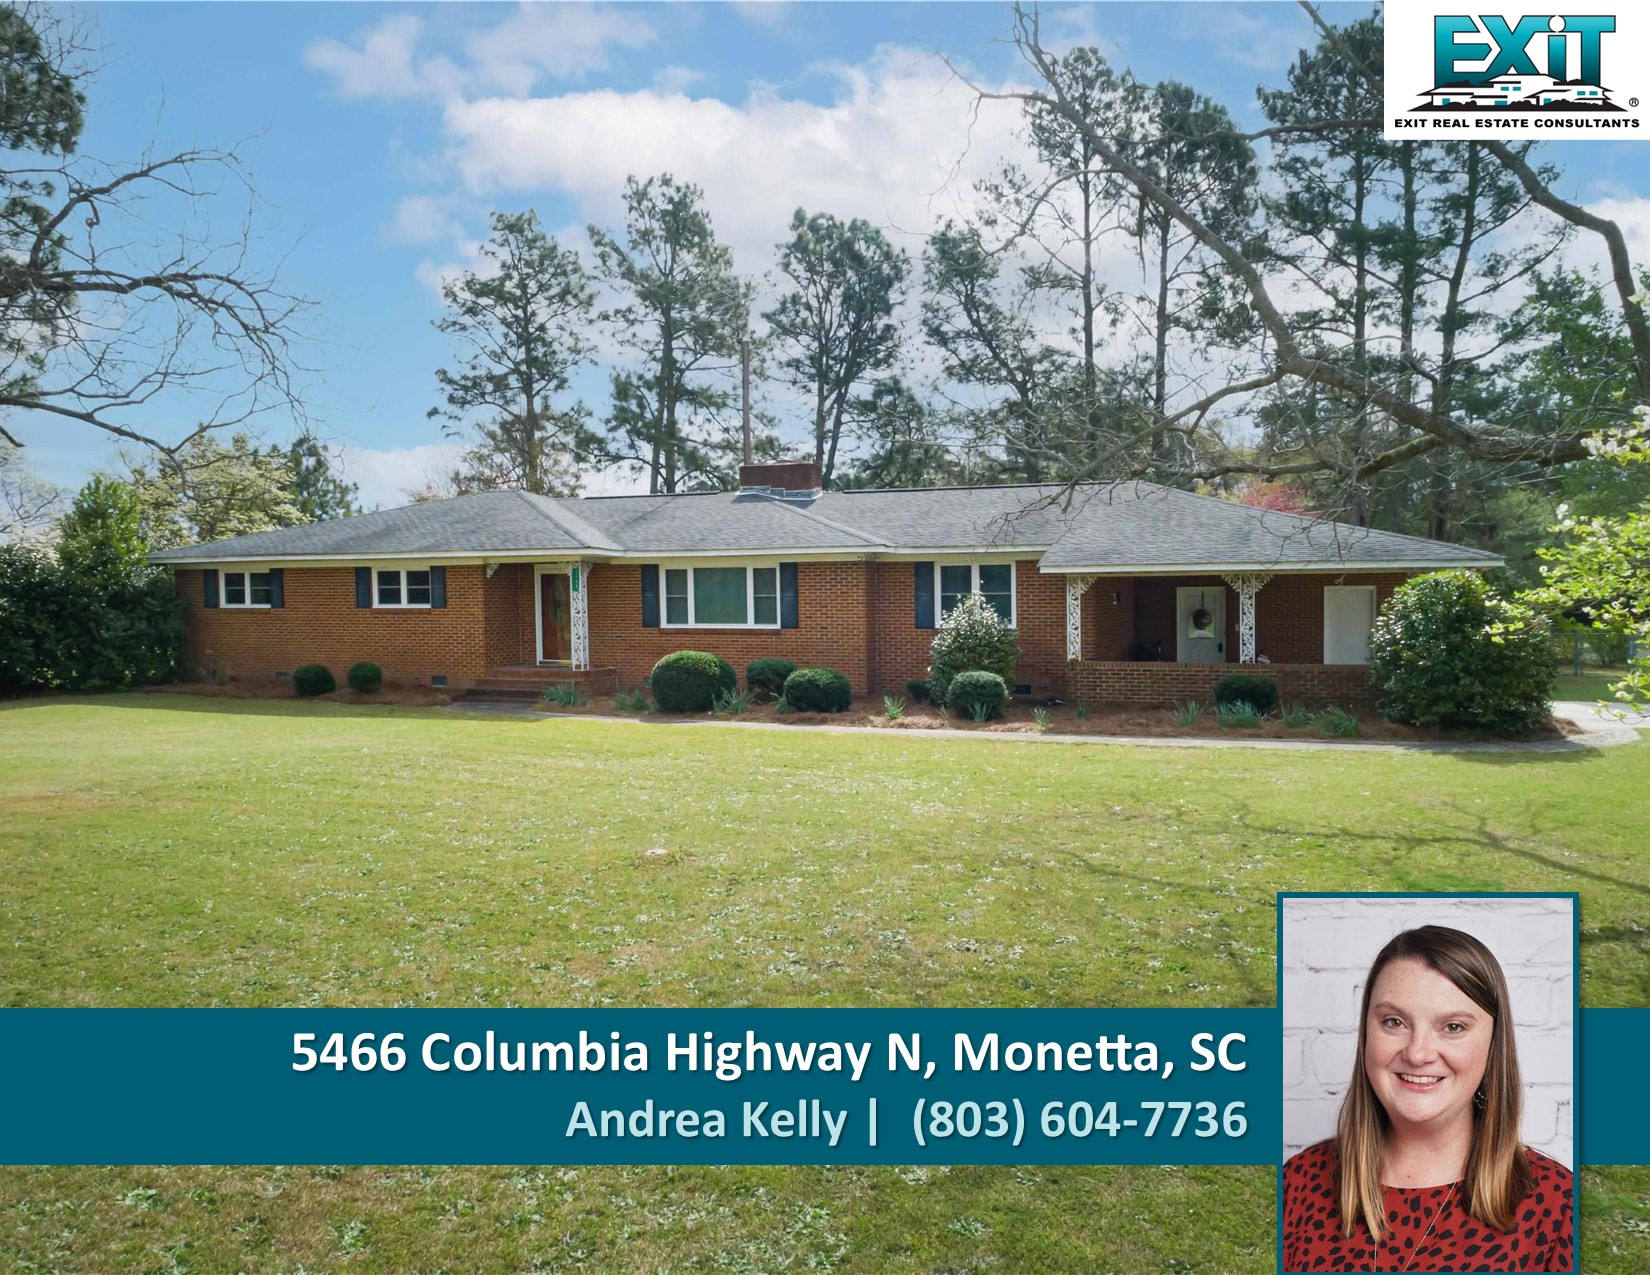 Just listed in Monetta